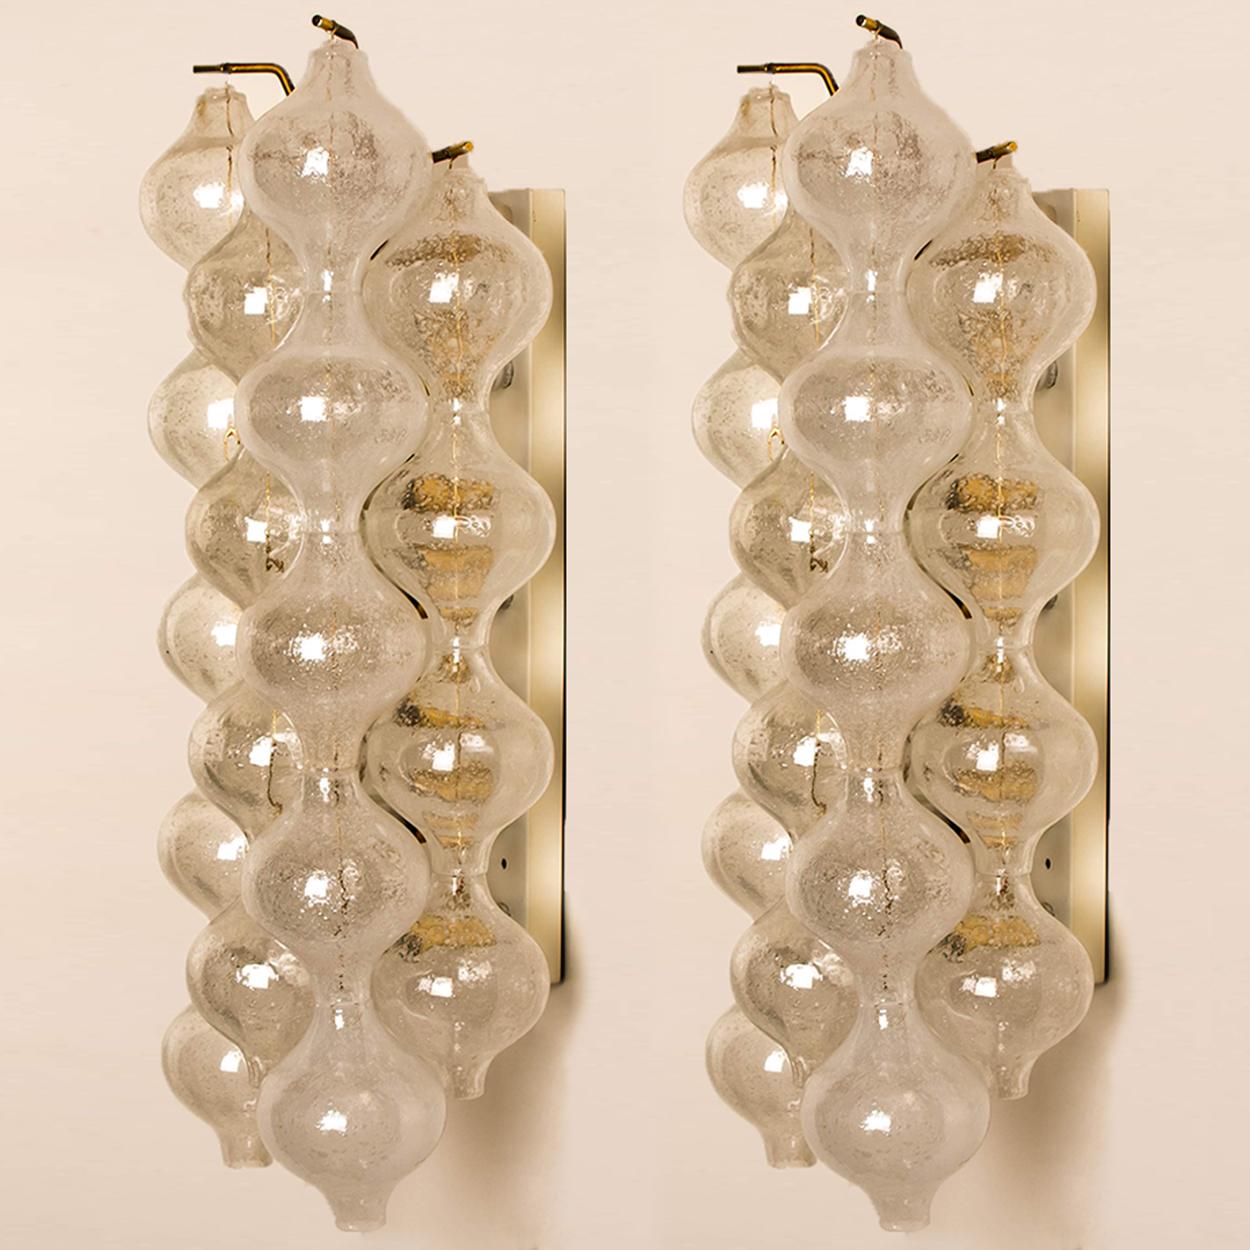 1 of the 2 unique pairs extra large and elegant 'Tulipan' glass wall sconces by J.T. Kalmar, Austria, Vienna, manufactured in mid-century, circa 1970 (late 1960s or-early 1970s). Tulip shaped hand blown bubble glasses. With a white enameled metal